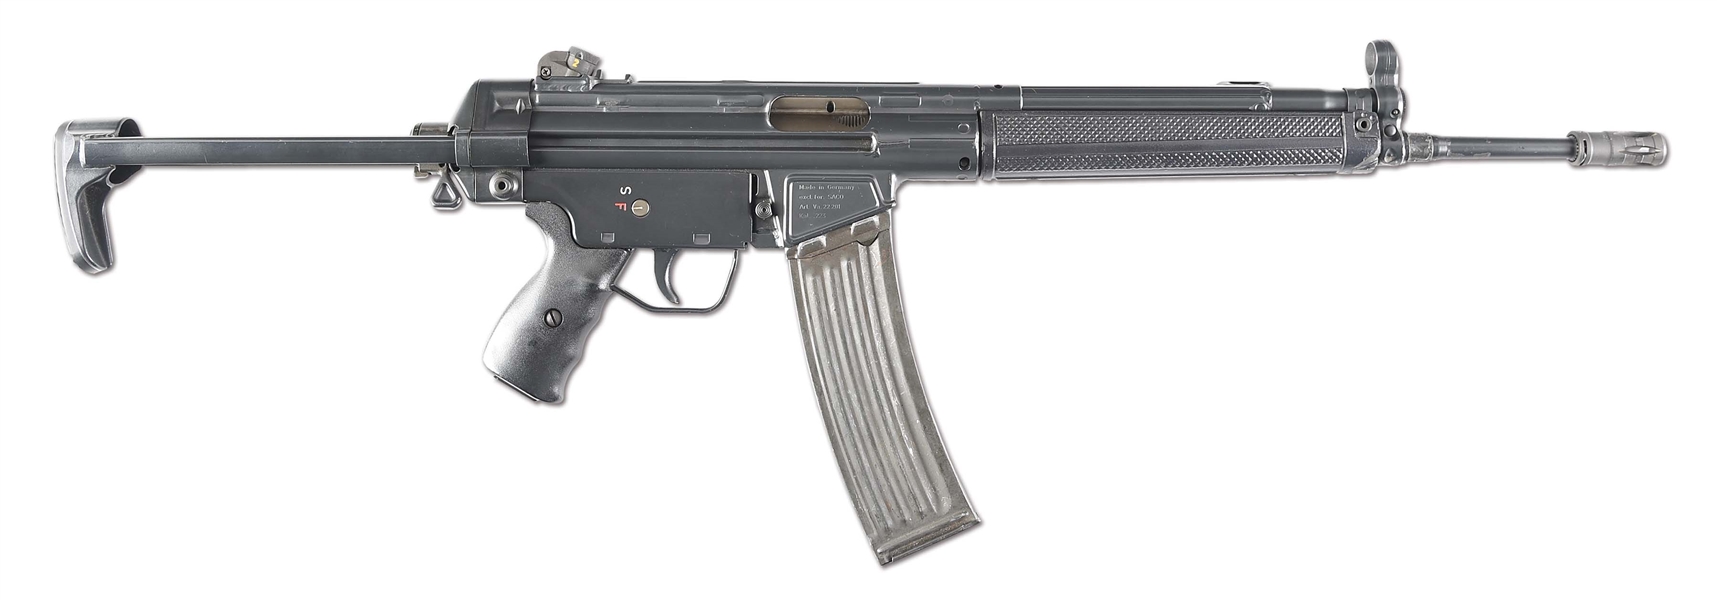 (N) ALWAYS DESIRABLE HECKLER & KOCH HK-93 CONVERTED TO A MACHINE GUN (FULLY TRANSFERABLE).